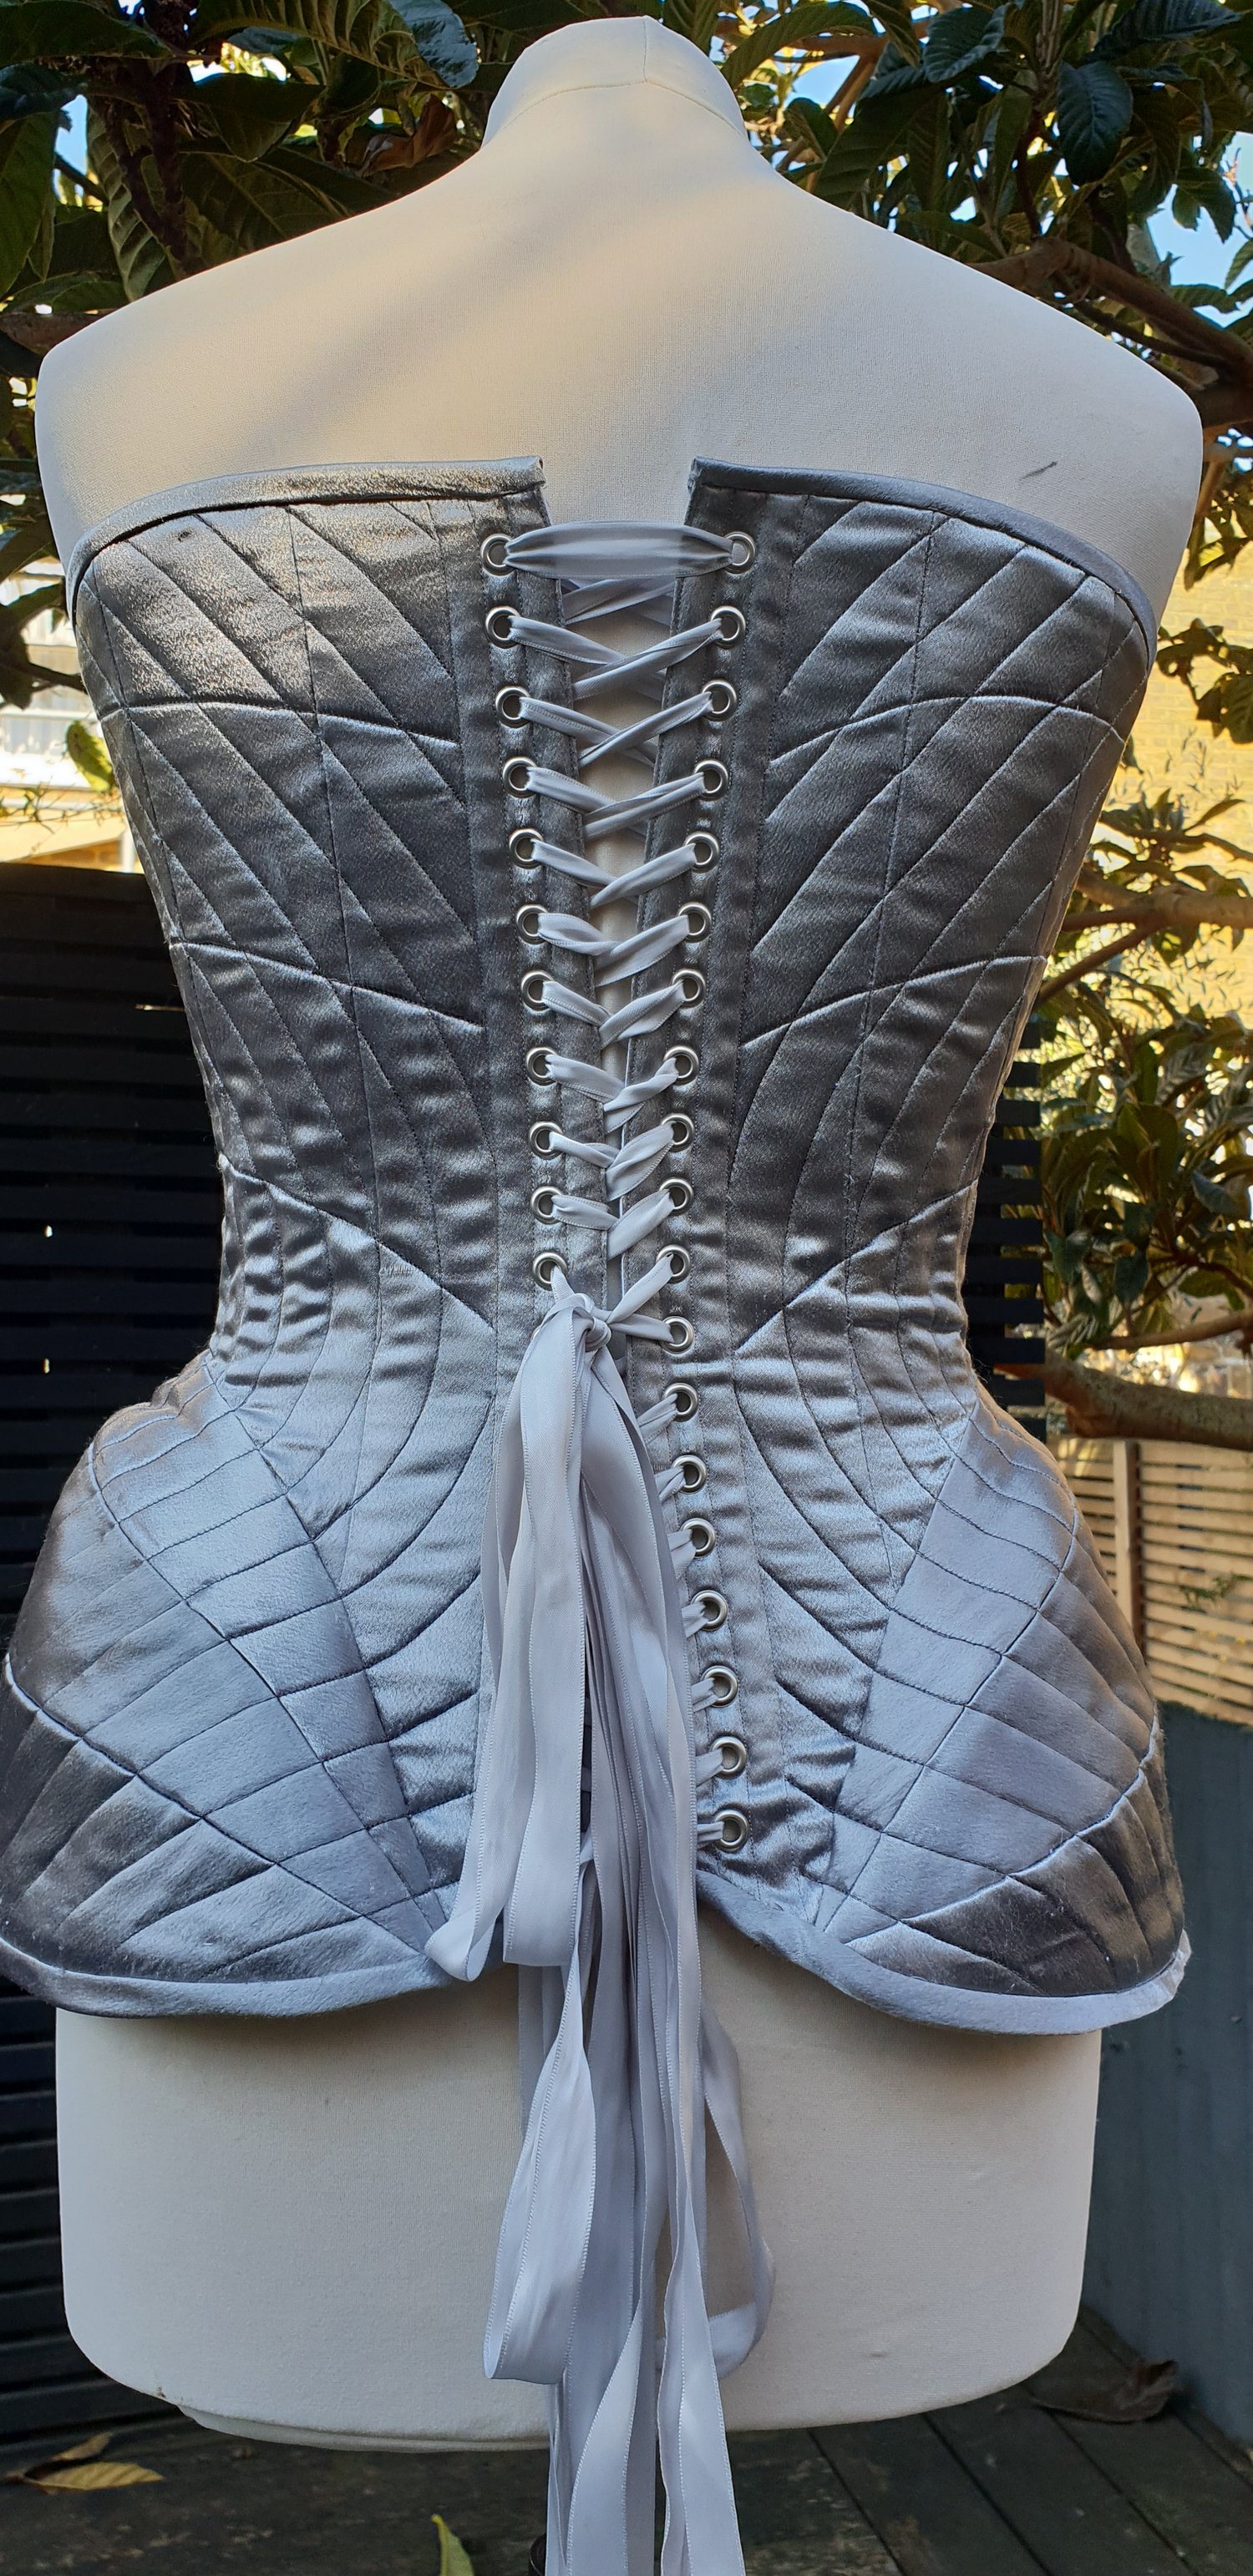 Clara Over-bust Corset Pattern with Hip Fins